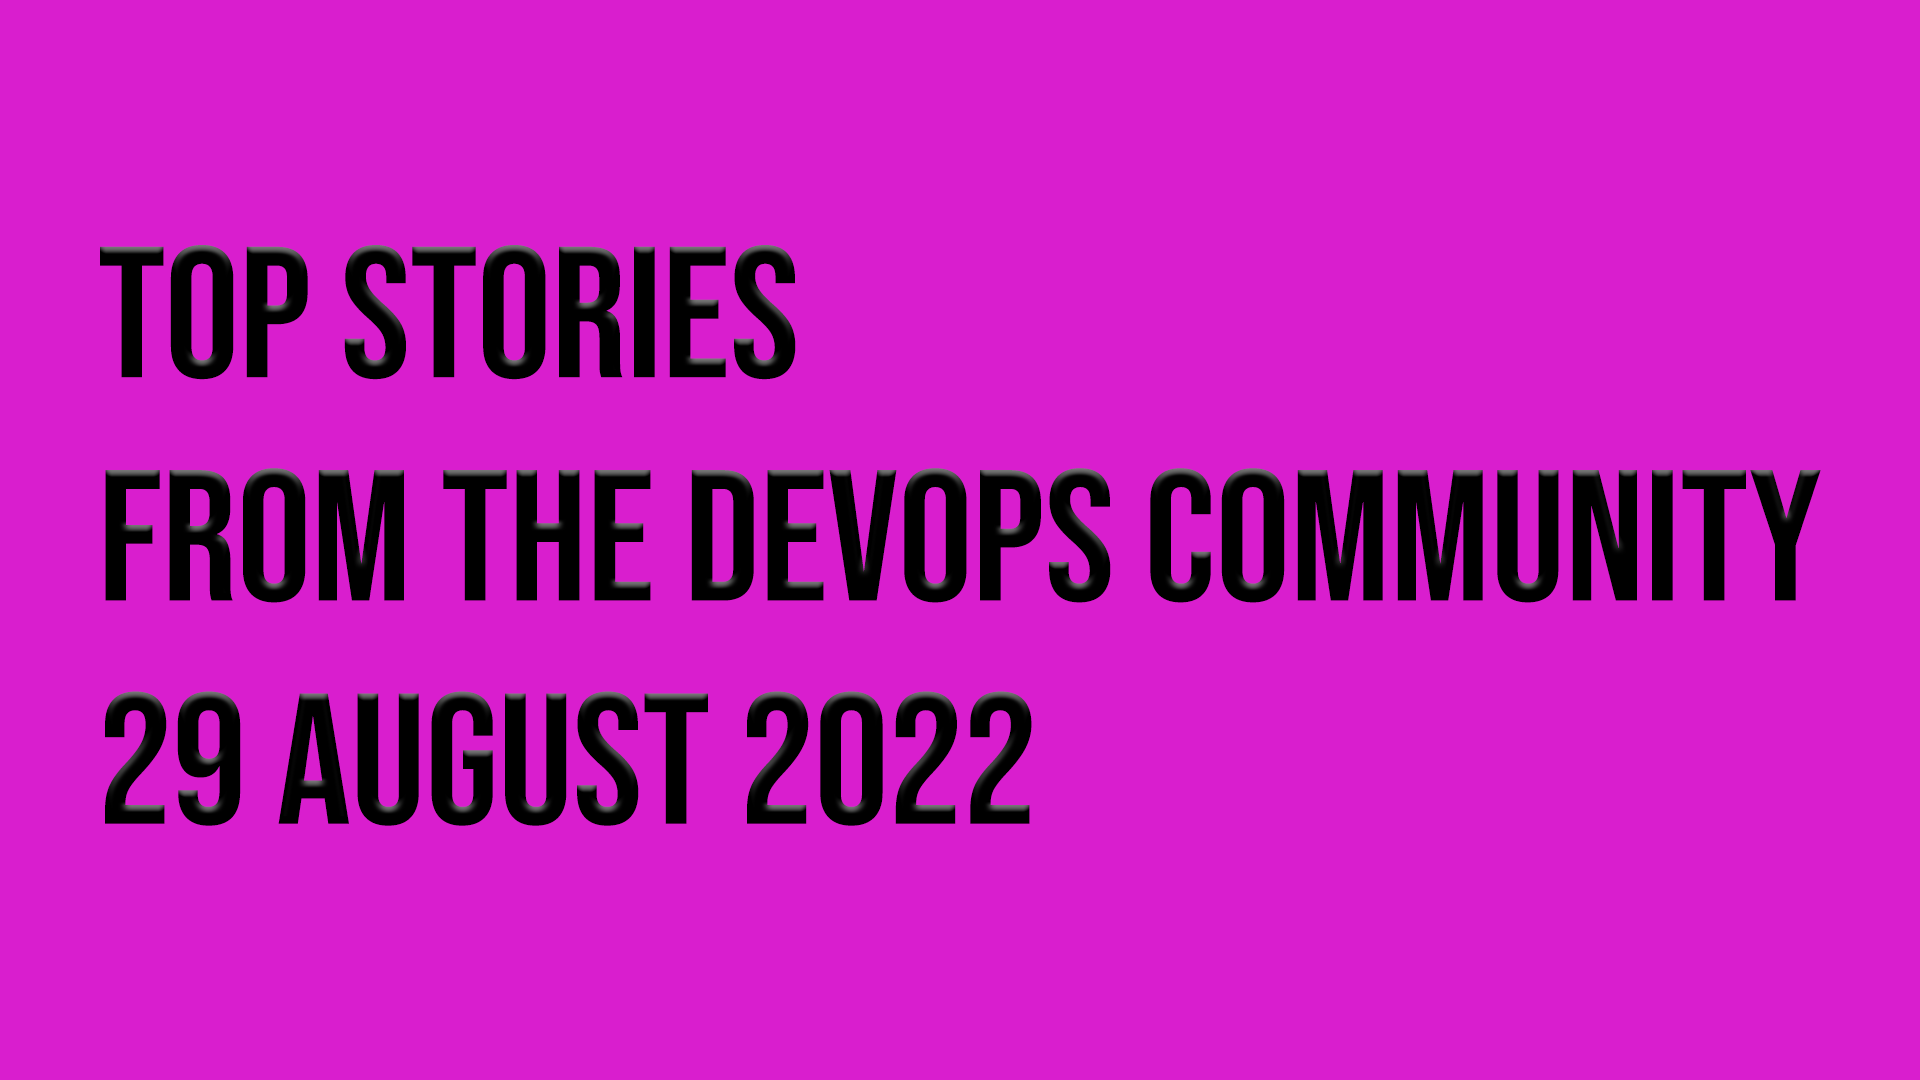 Top Stories from the DevOps Community - 29 August 2022